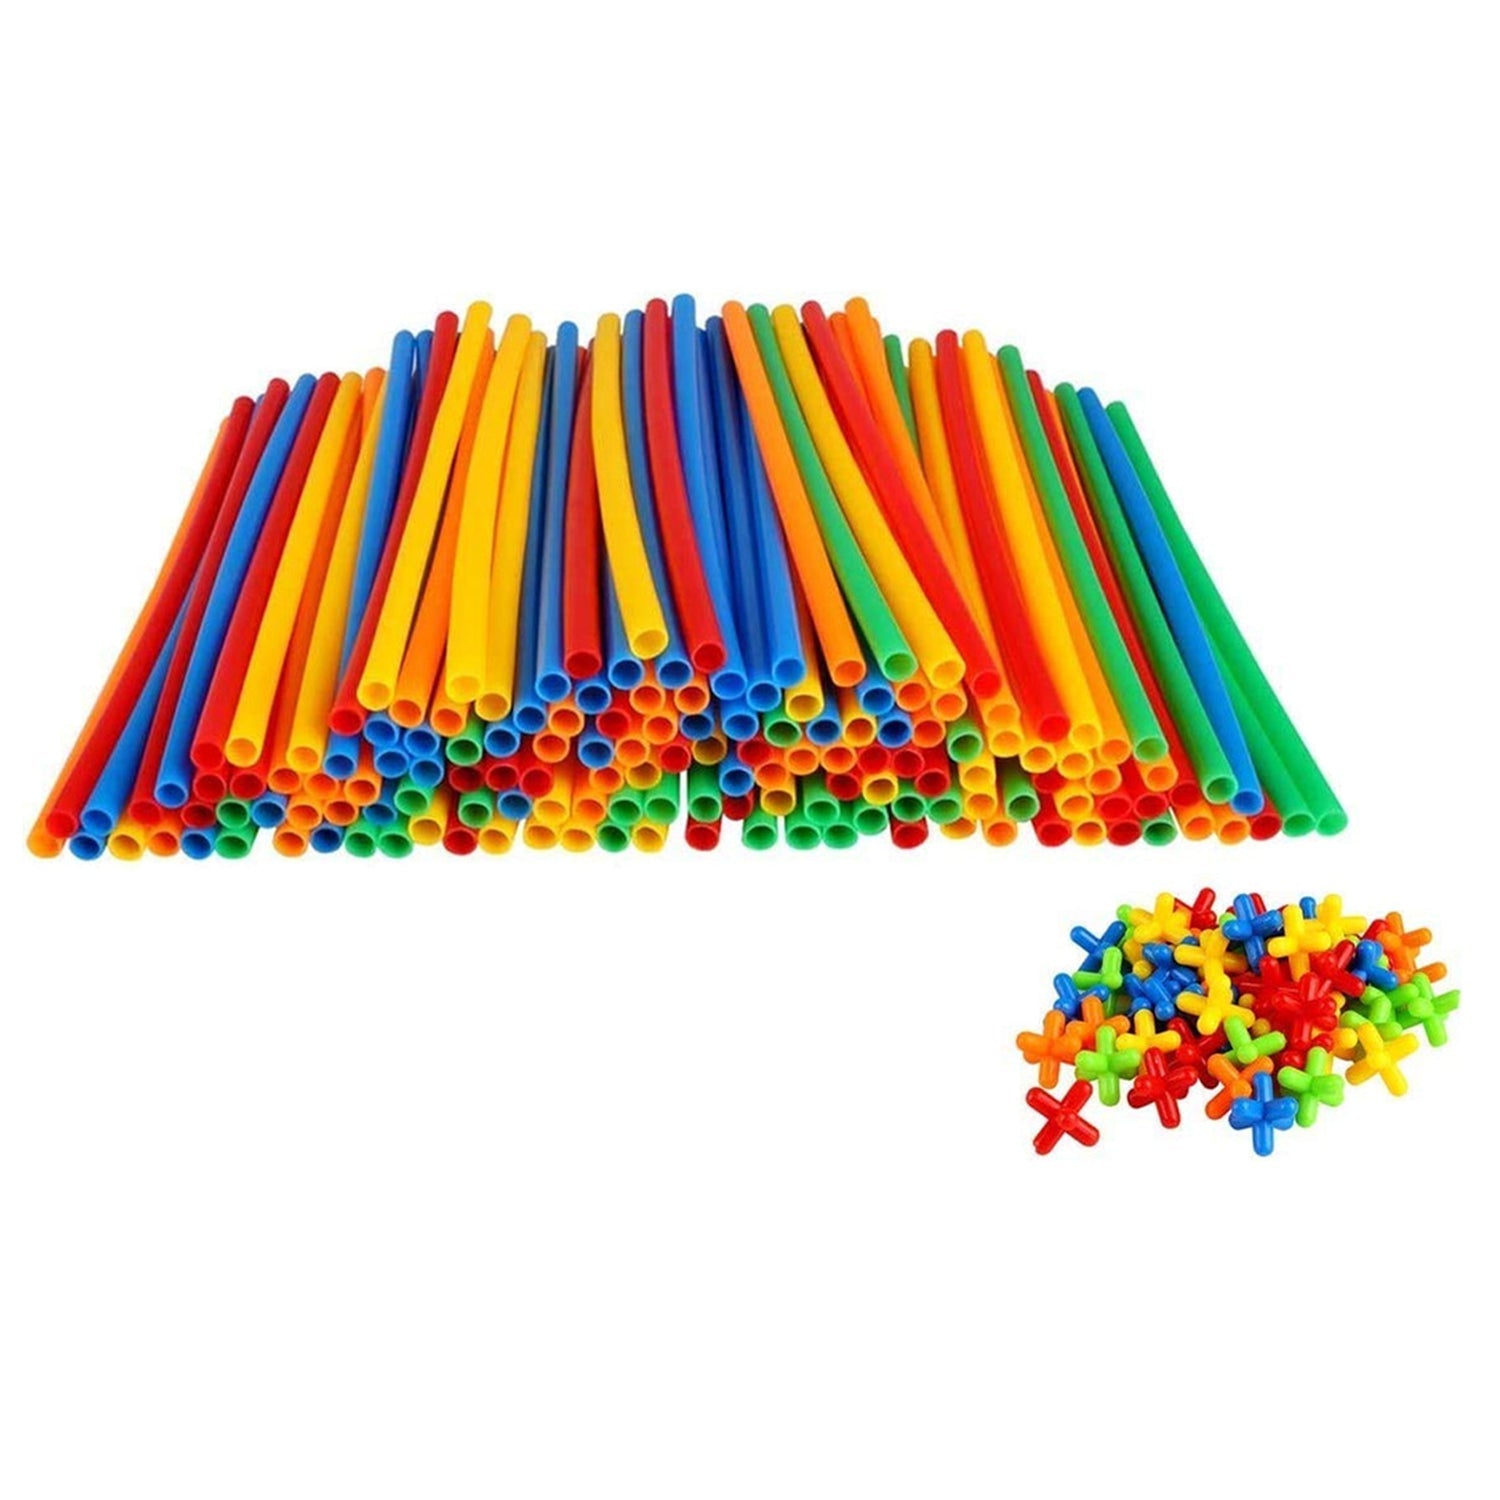 3917 100 Pc 4 D Block Toy used in all kinds of household and official places specially for kids and children for their playing and enjoying purposes. 